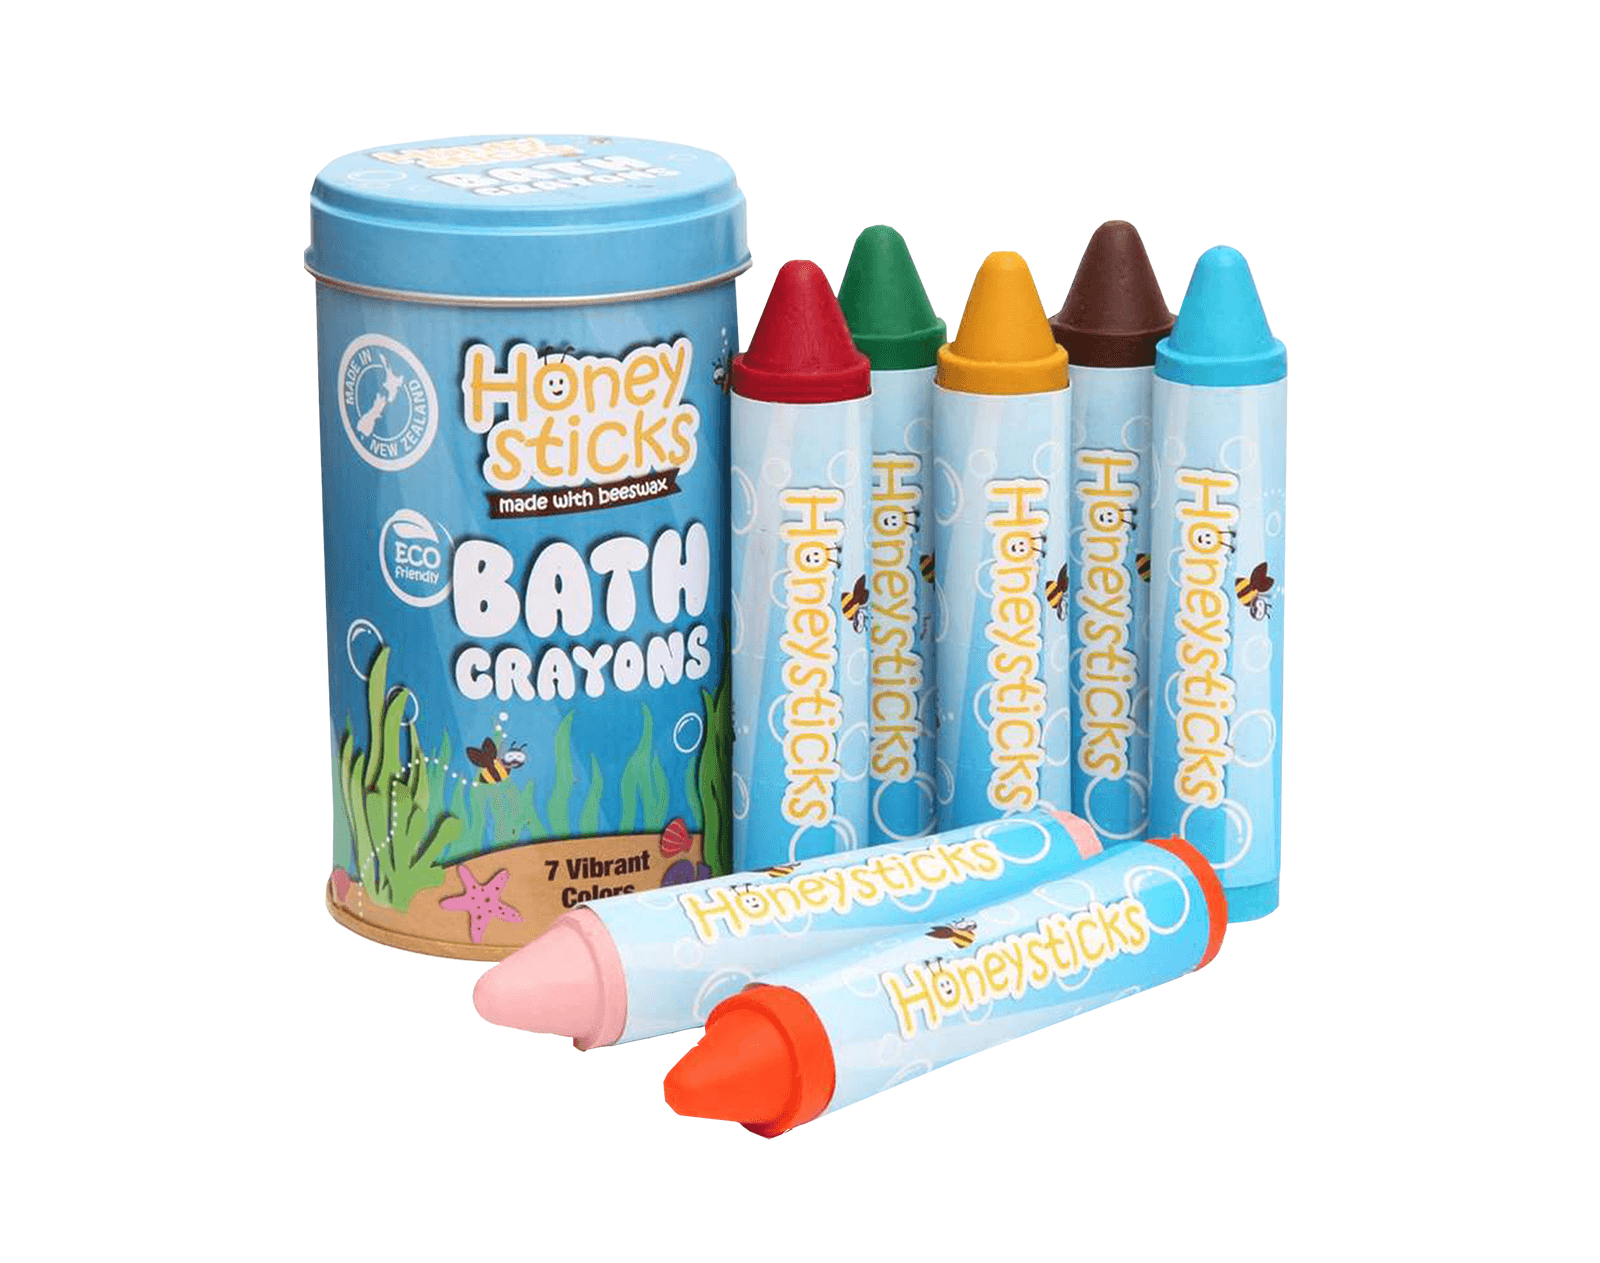  Honeysticks Jumbo Size Crayons For Toddlers and Kids - 100%  Pure Beeswax, Easy To Hold and Use - Child Safe, Non Toxic Crayons - Food  grade Coloring - 6 Vibrant Colors 